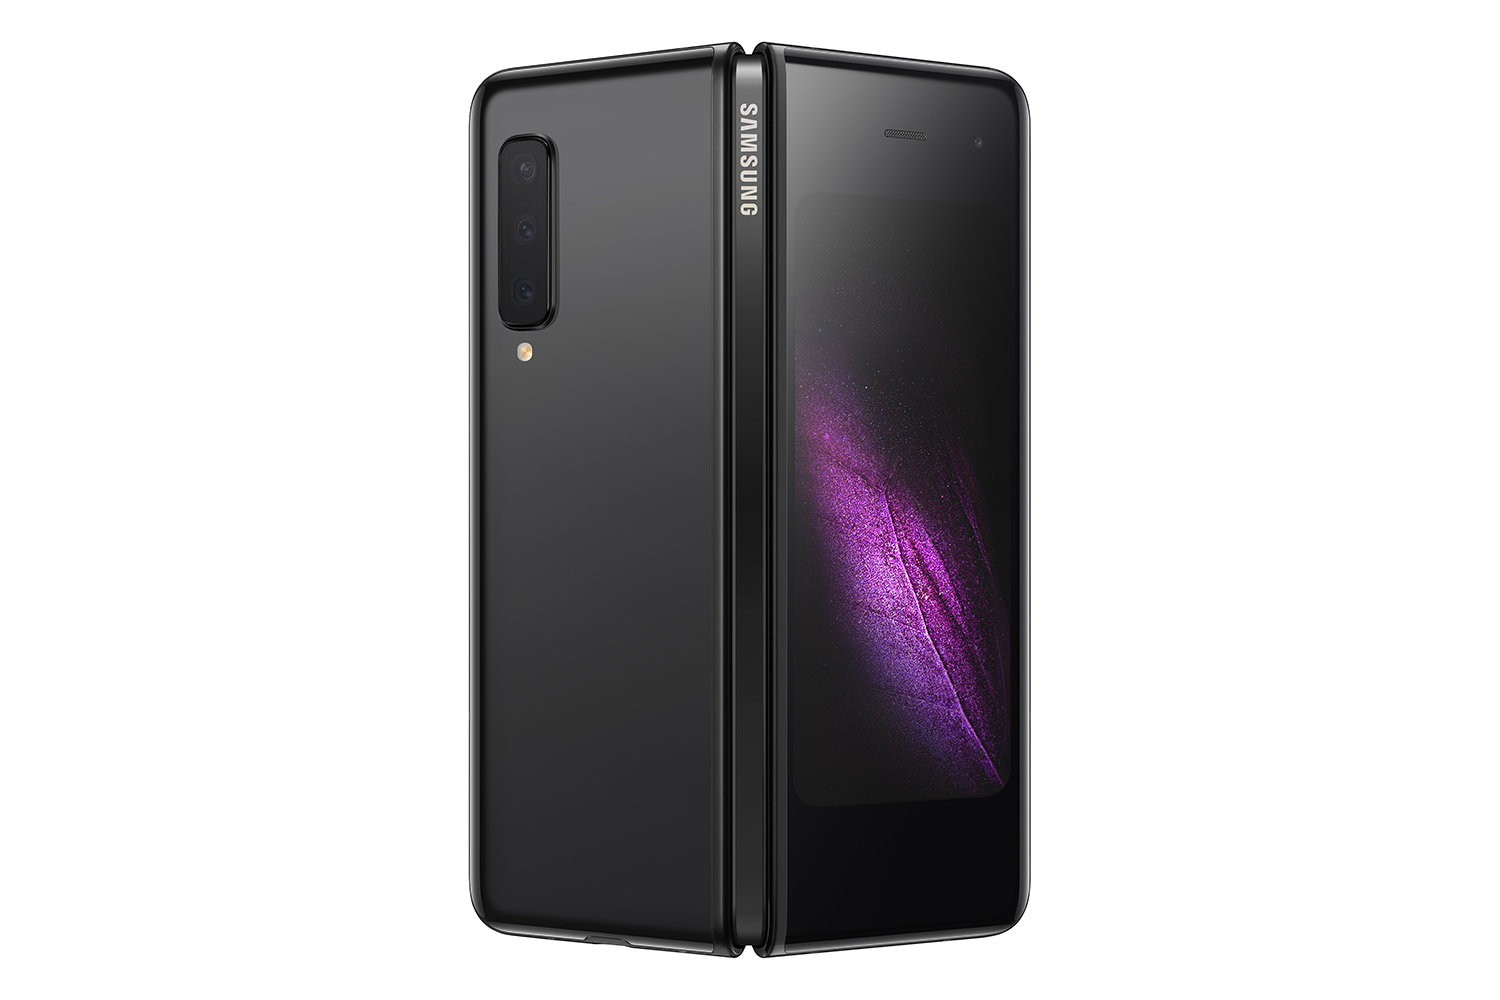 Galaxy Fold sold out